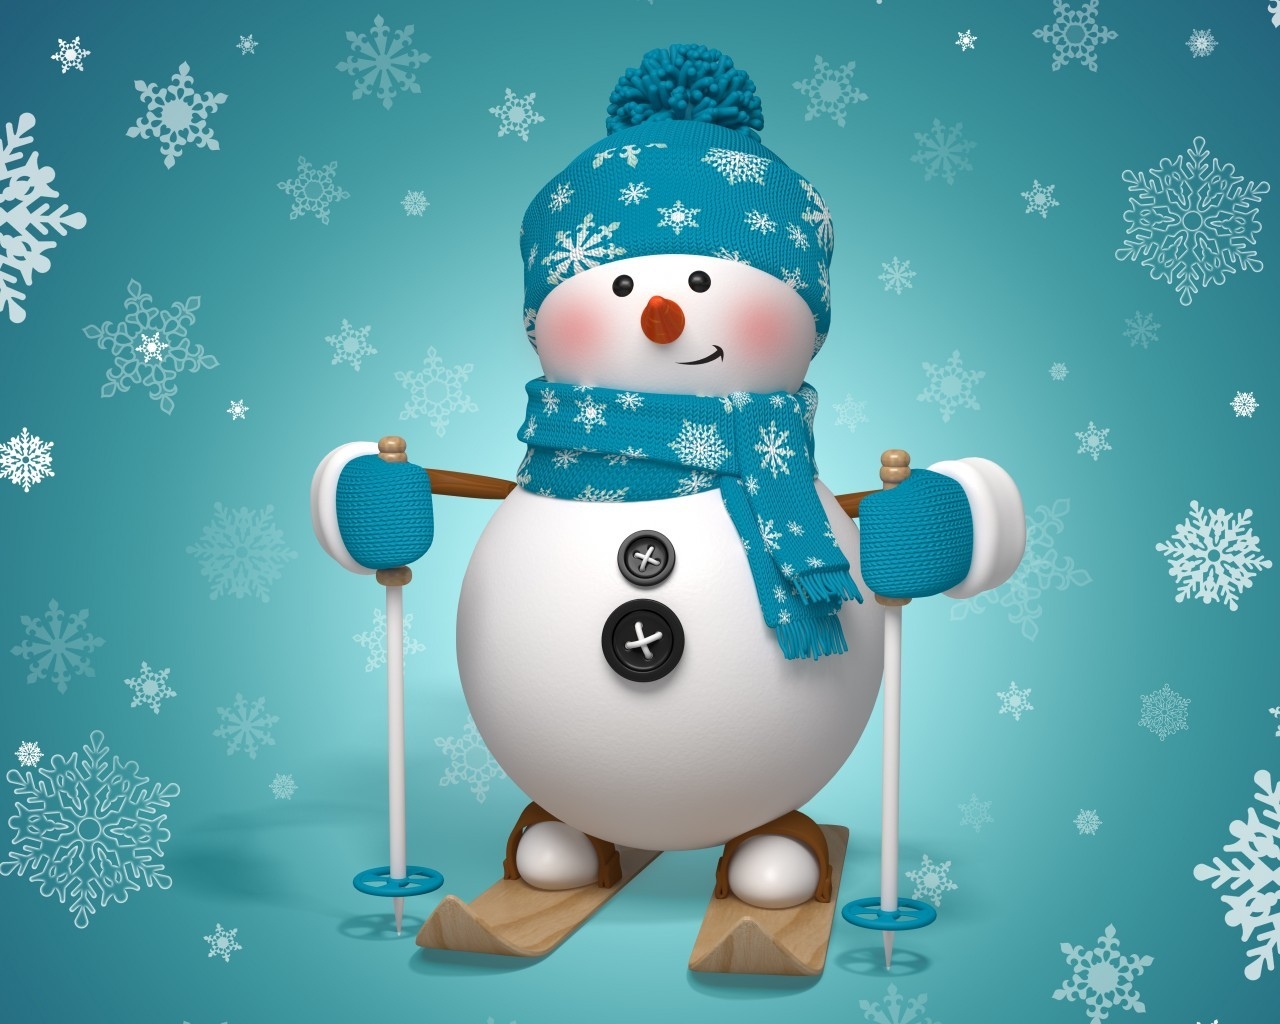 Snowman Ready to Ski for 1280 x 1024 resolution